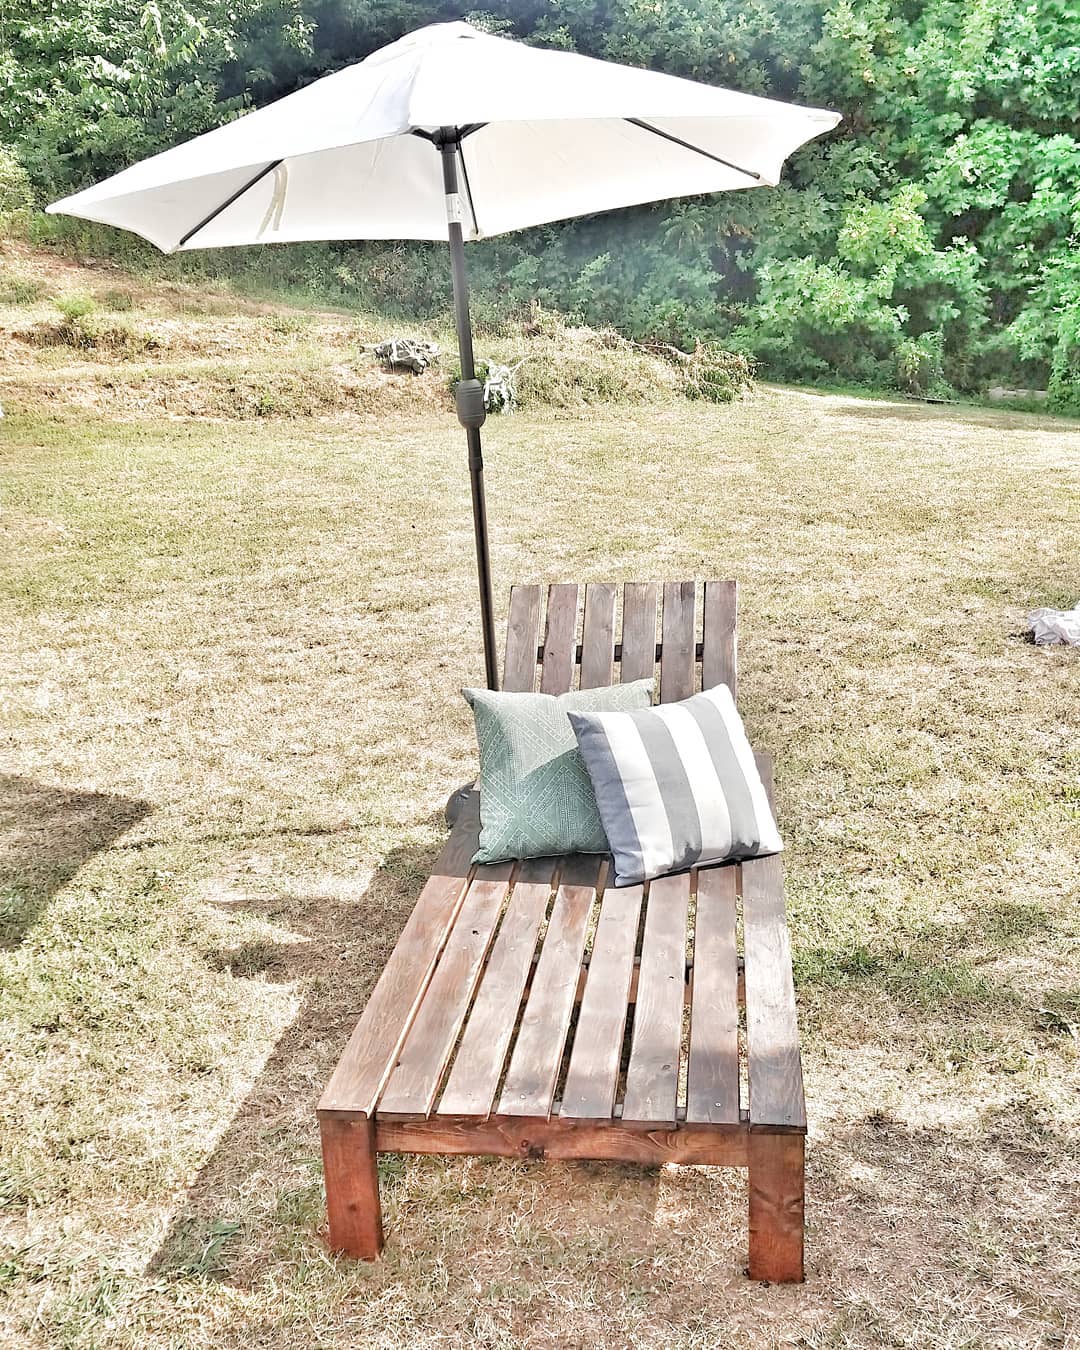 Homemade Wooden Lounger with an Umbrella. Photo by Instagram user @kelli_rae_smith